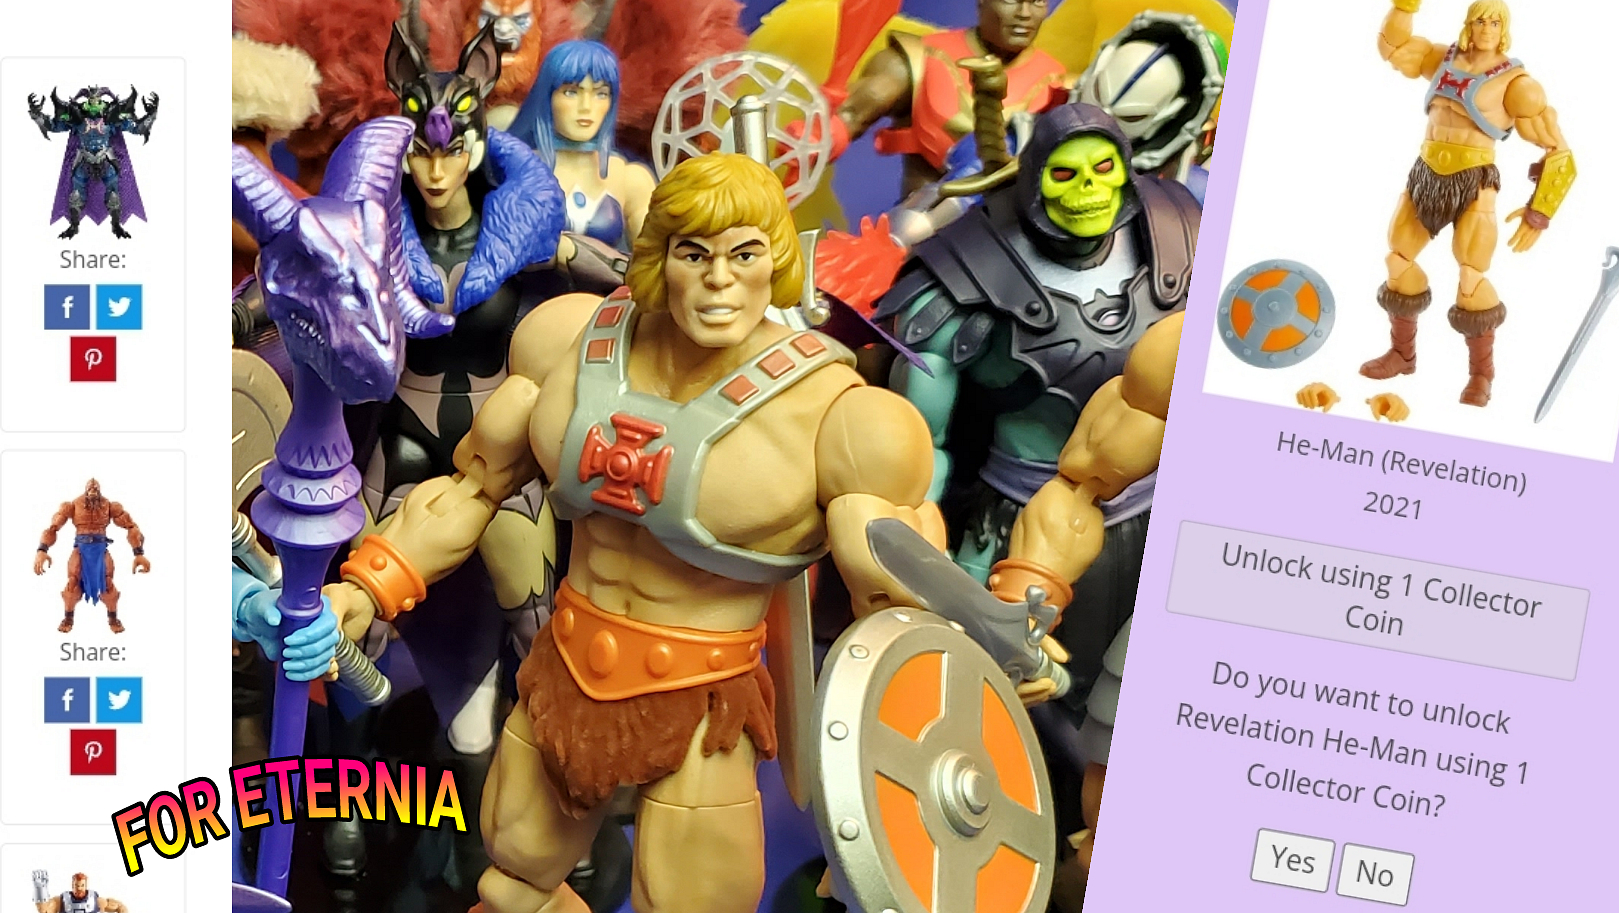 NEW FEATURE! Track your Figure Collection on ForEternia.com!